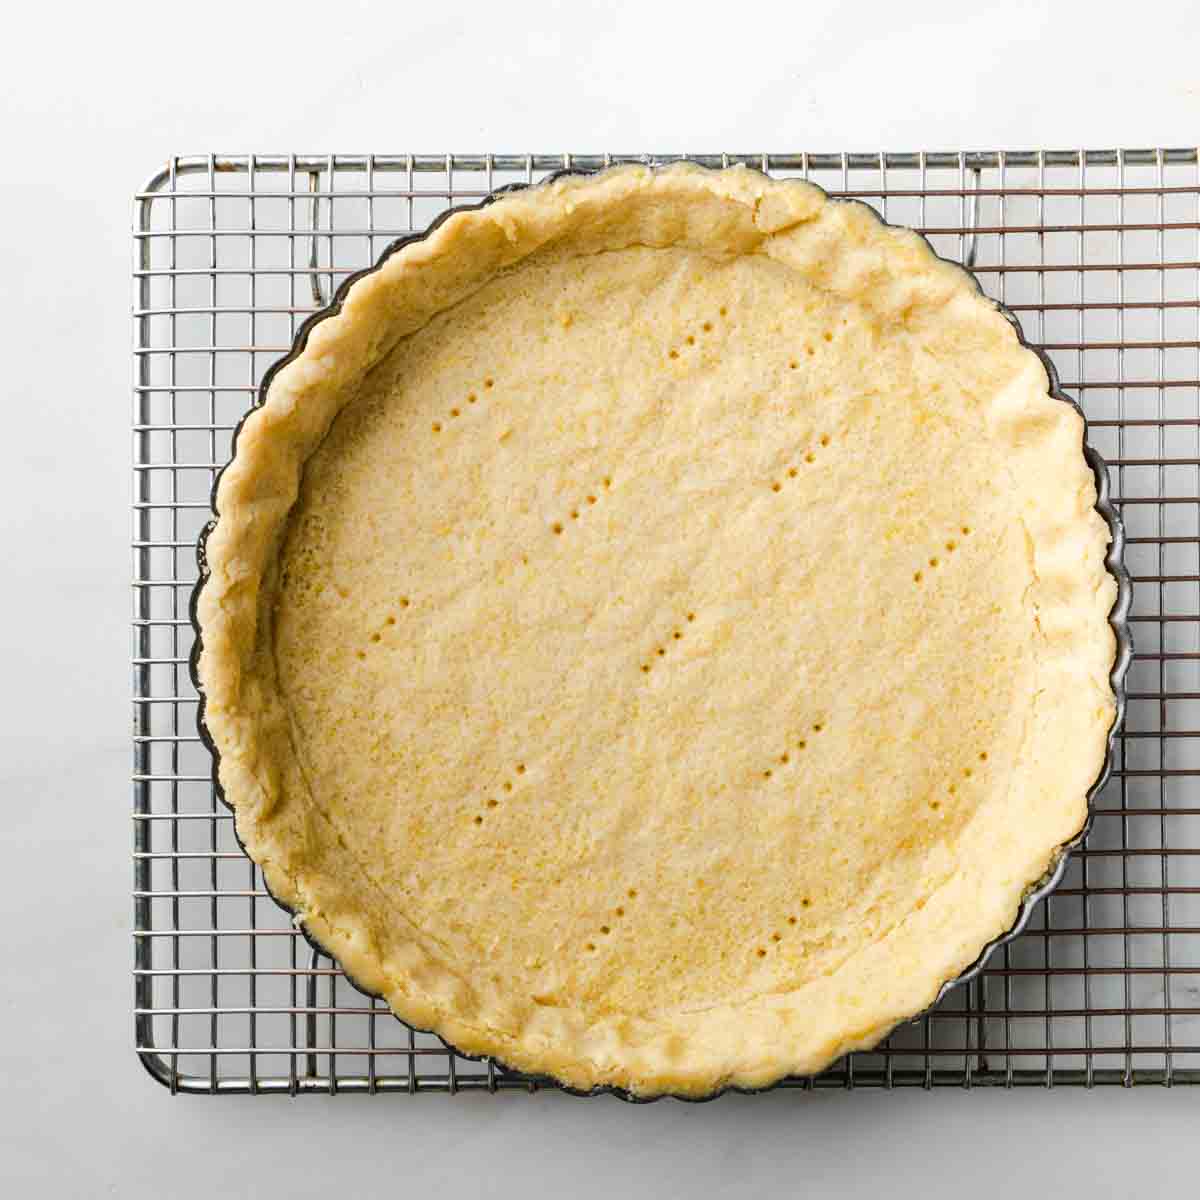 The blind baked pie crust on a cooling rack.